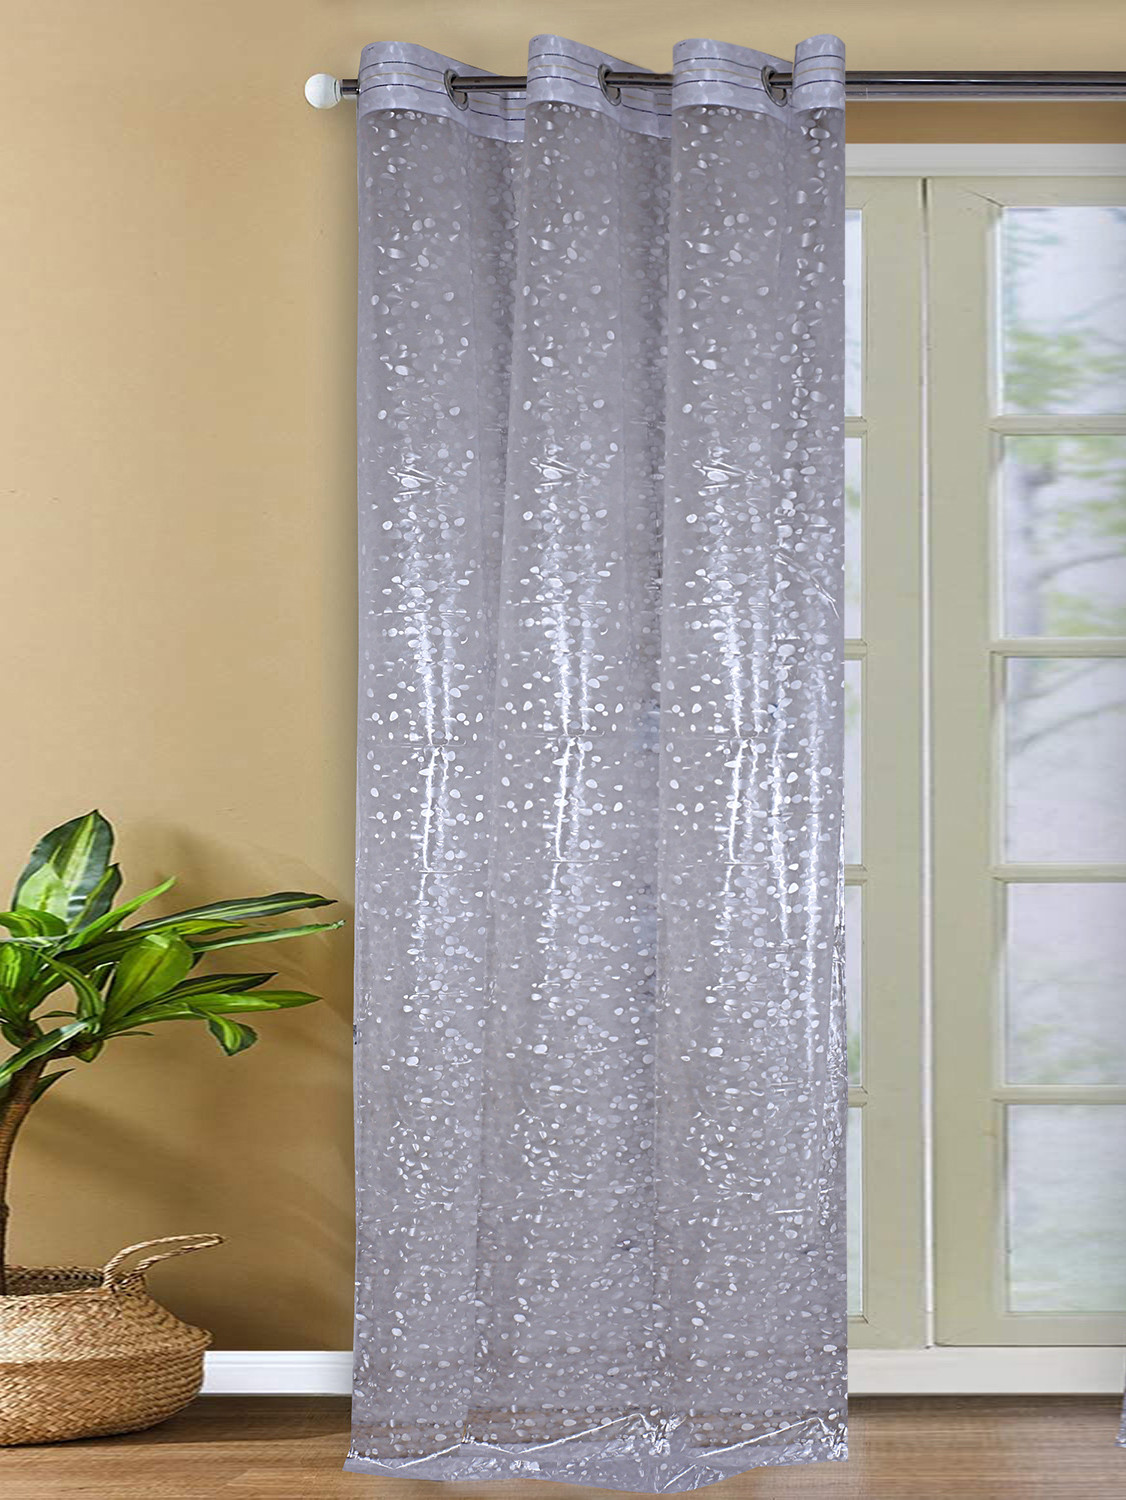 Kuber Industries Stone Print Stain-Resistant & Waterproof PVC AC Curtain For Home, office, restaurant 8 Feet With 6 Grommets (Transparent)